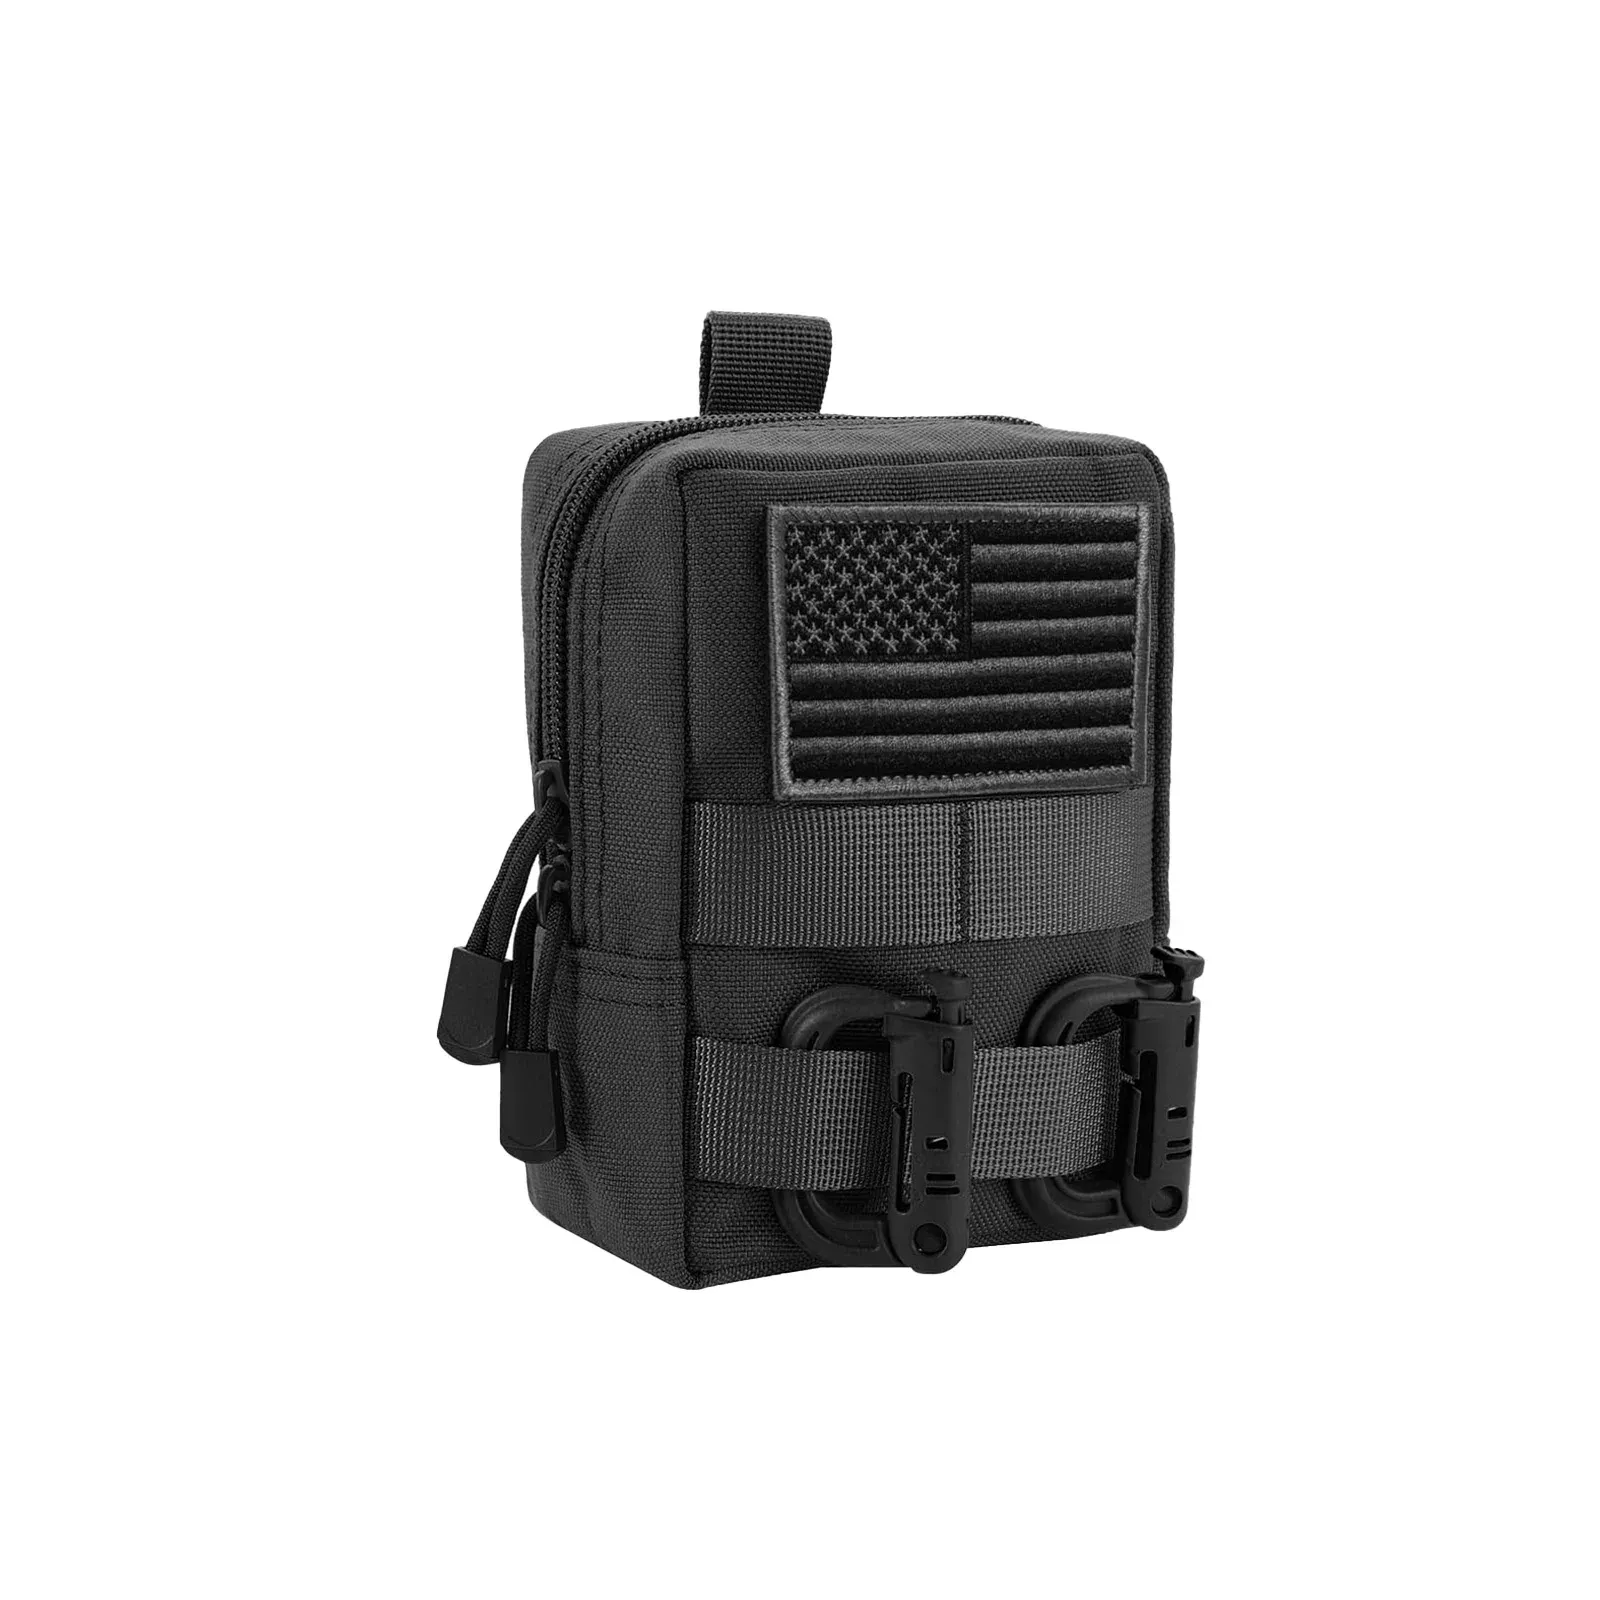 Packs Molle Pouch Tactical Compact Waterresistant Pack Utility EDCウエストバッグ狩りのトレッキングランニングキャンプ